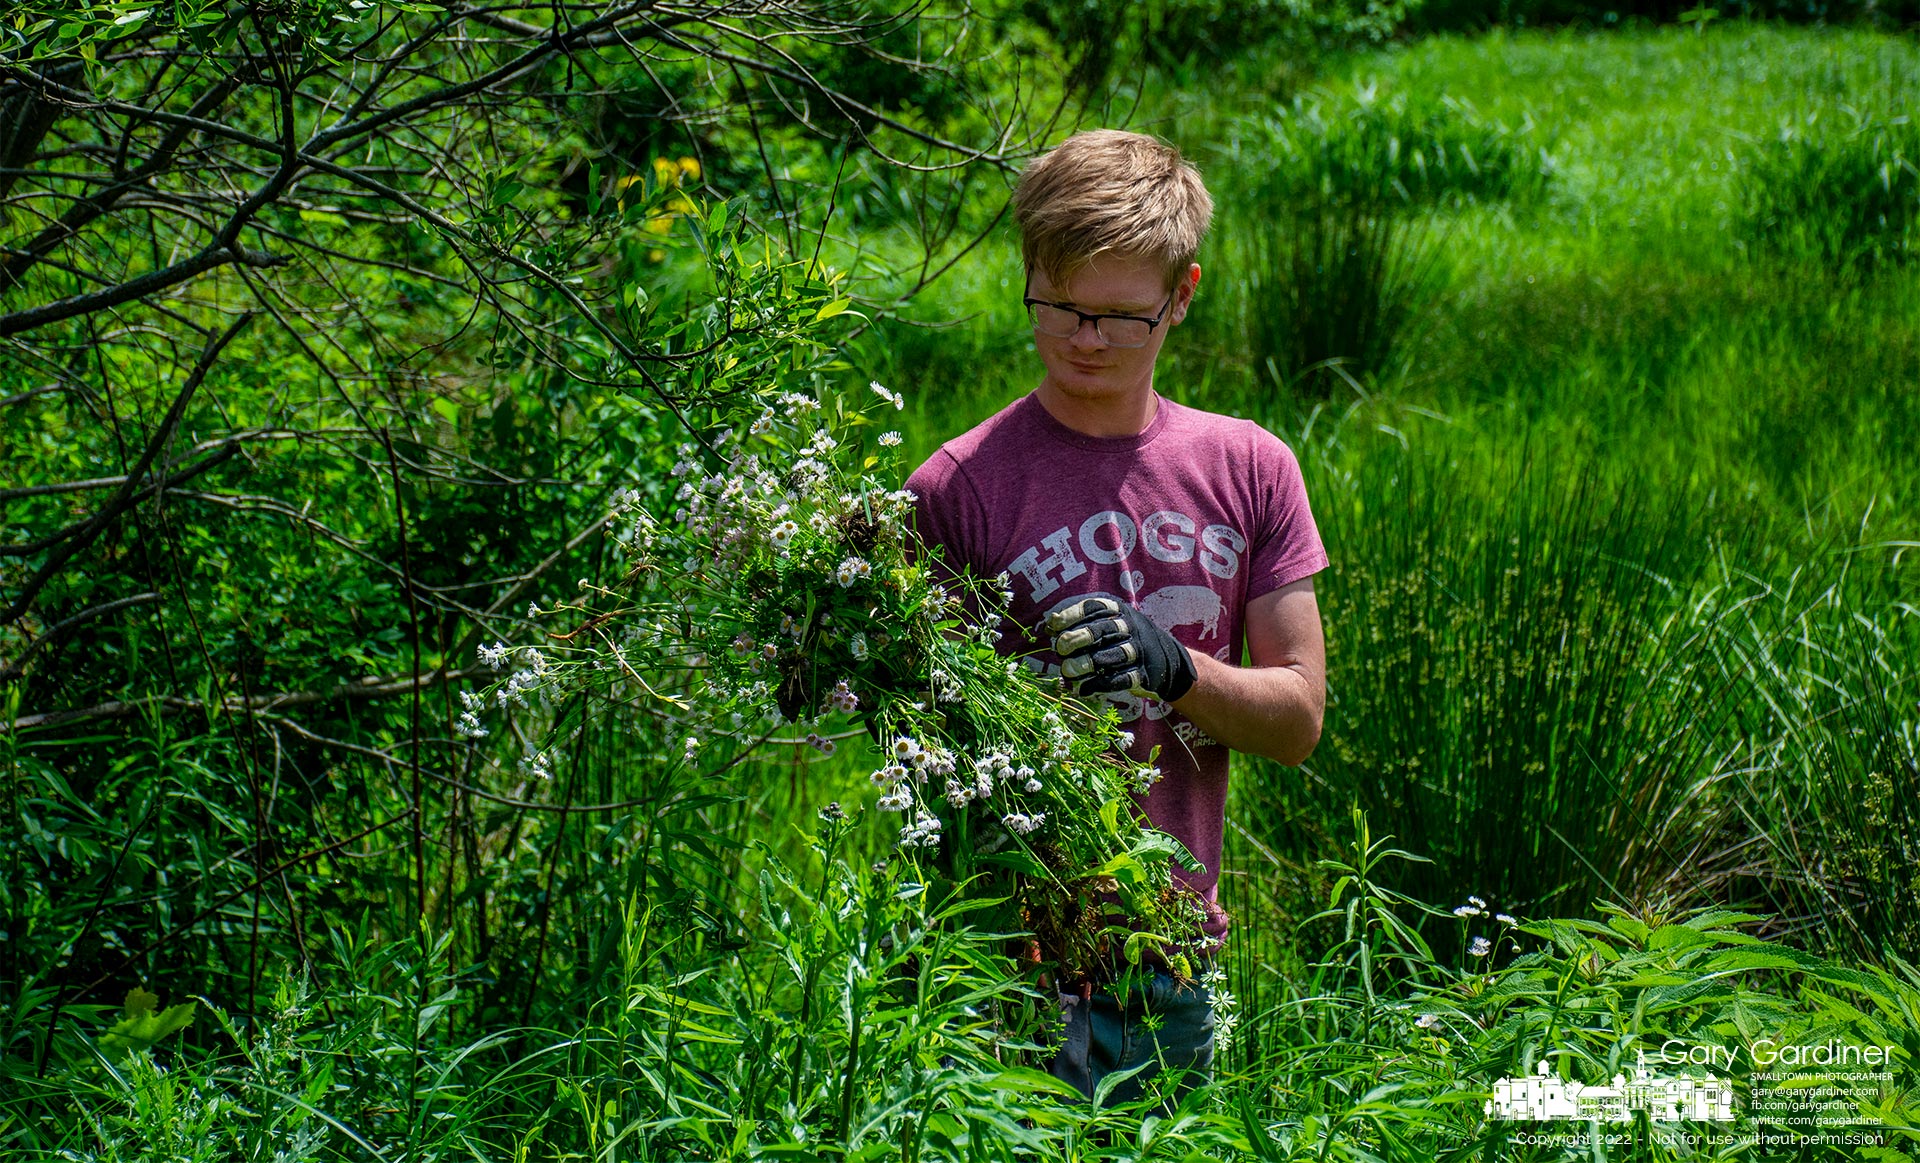 A worker inspects a handful of invasive flowers pulled from the edge of a holding pond near the Walnut Street boat ramp on Hoover Reservoir as spring growth of the dangerous weeds heightens their visibility. My Final Photo for May 26, 2022.